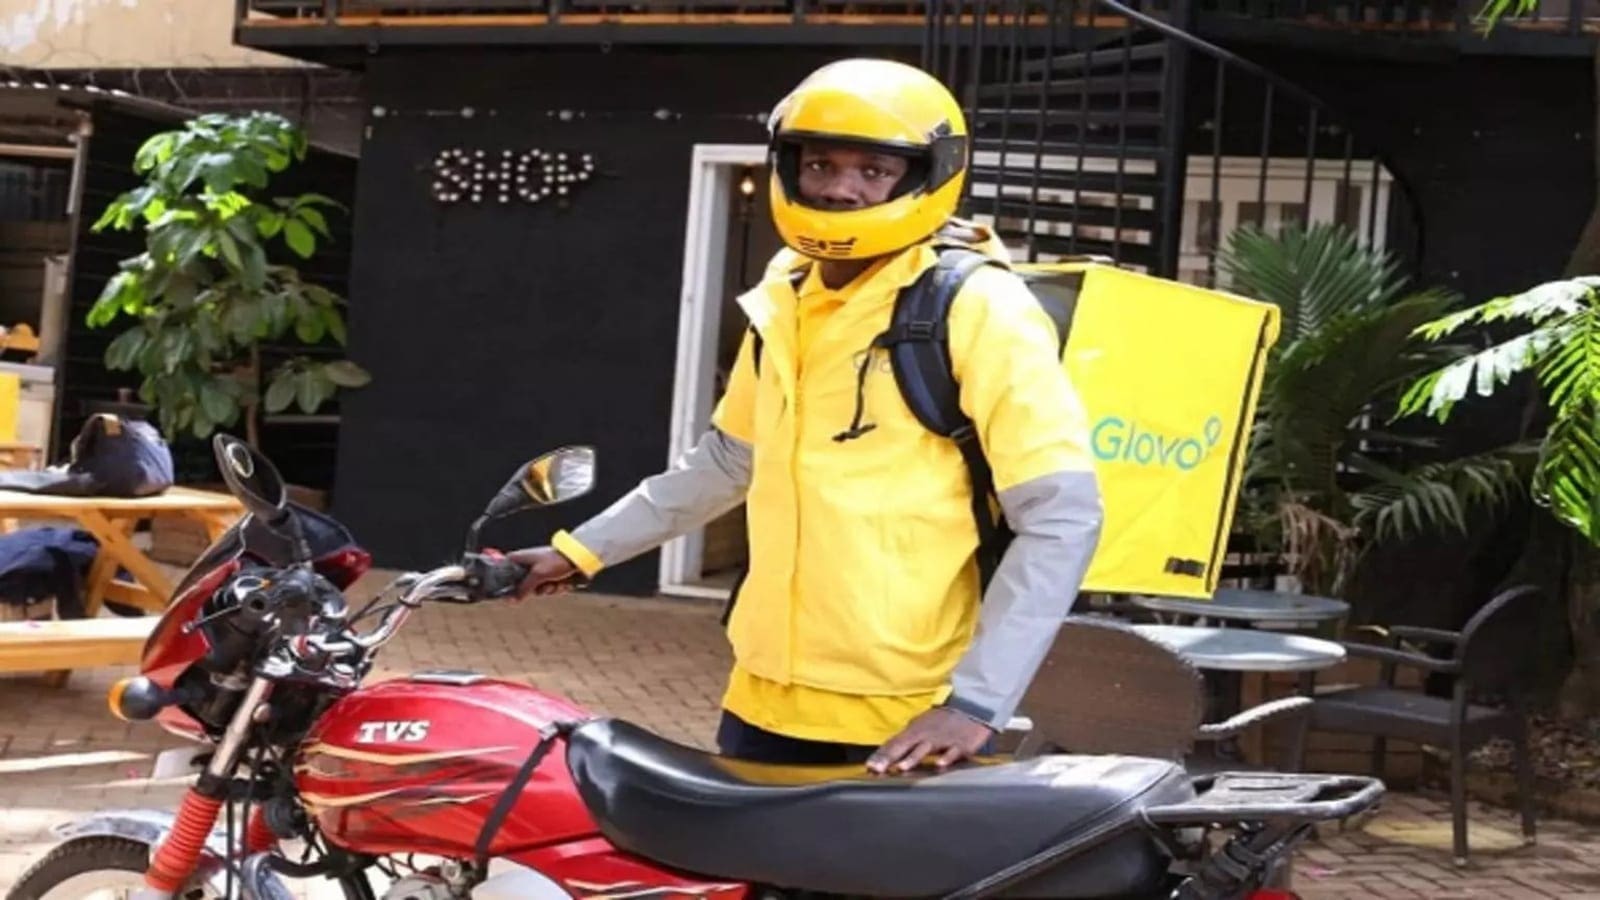 Food delivery service Glovo to inject US$4m in Ghana to beef up operations